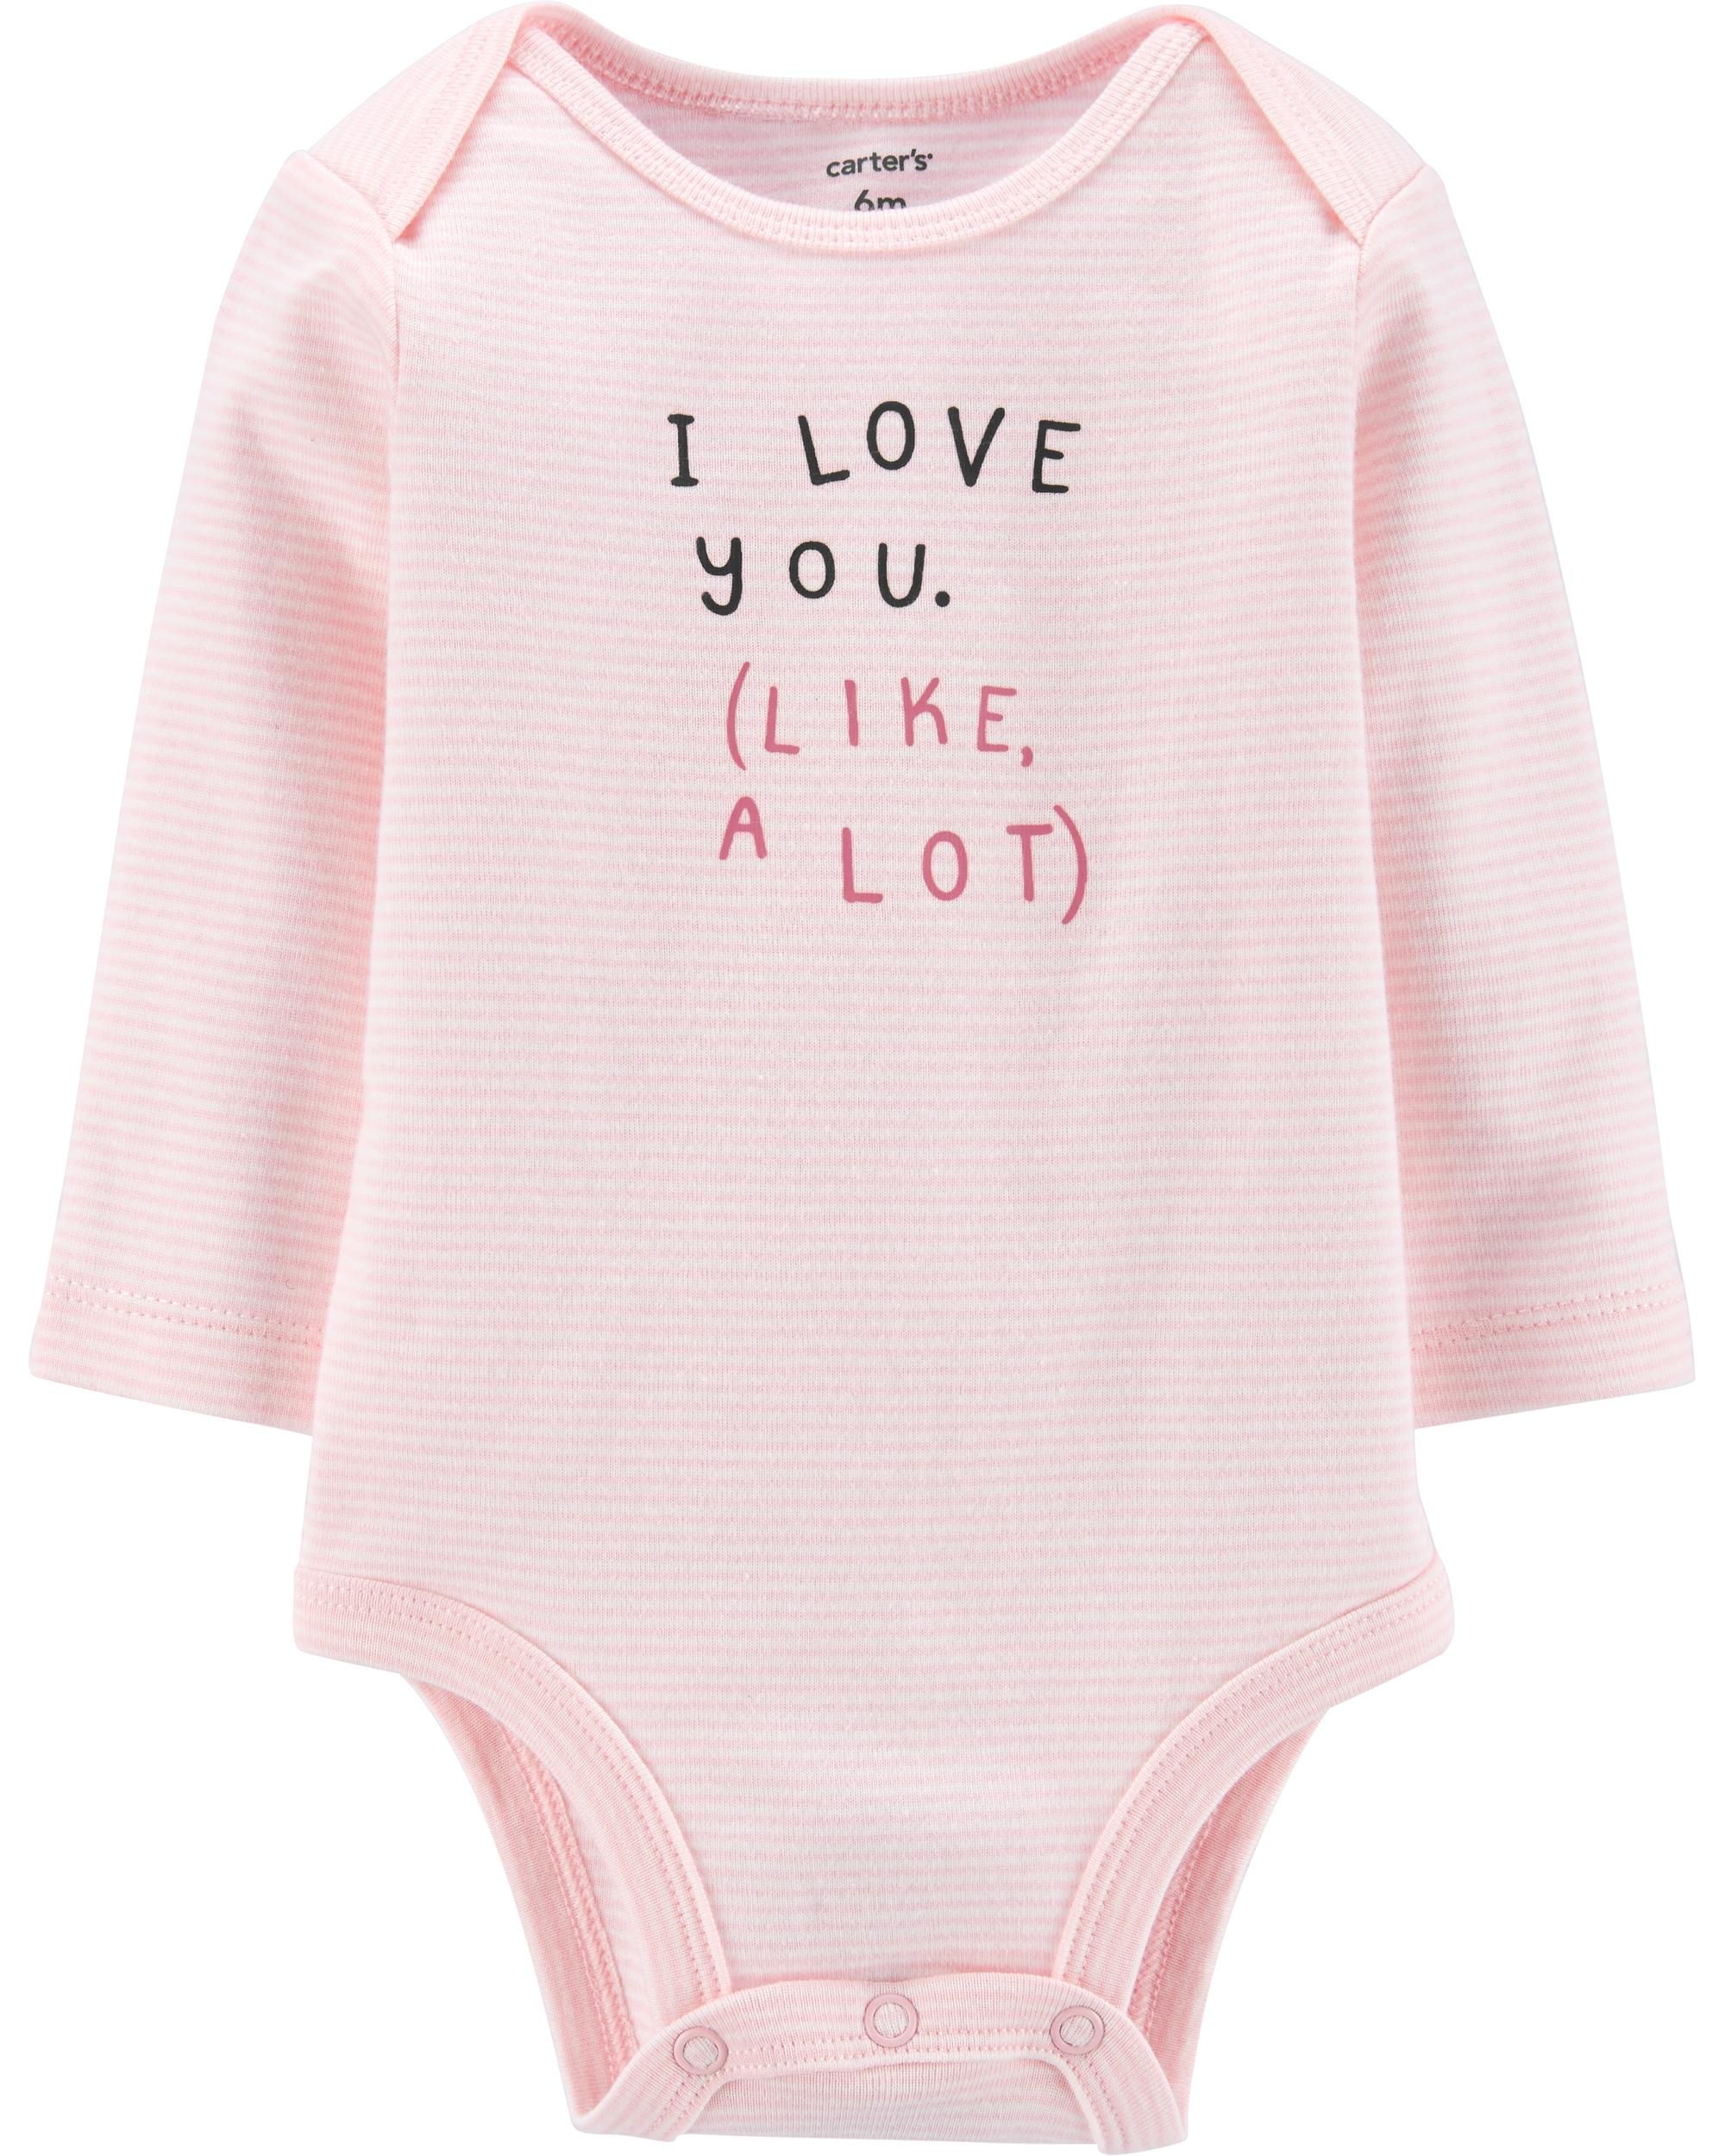 I Love You Collectible Bodysuit | Carter's